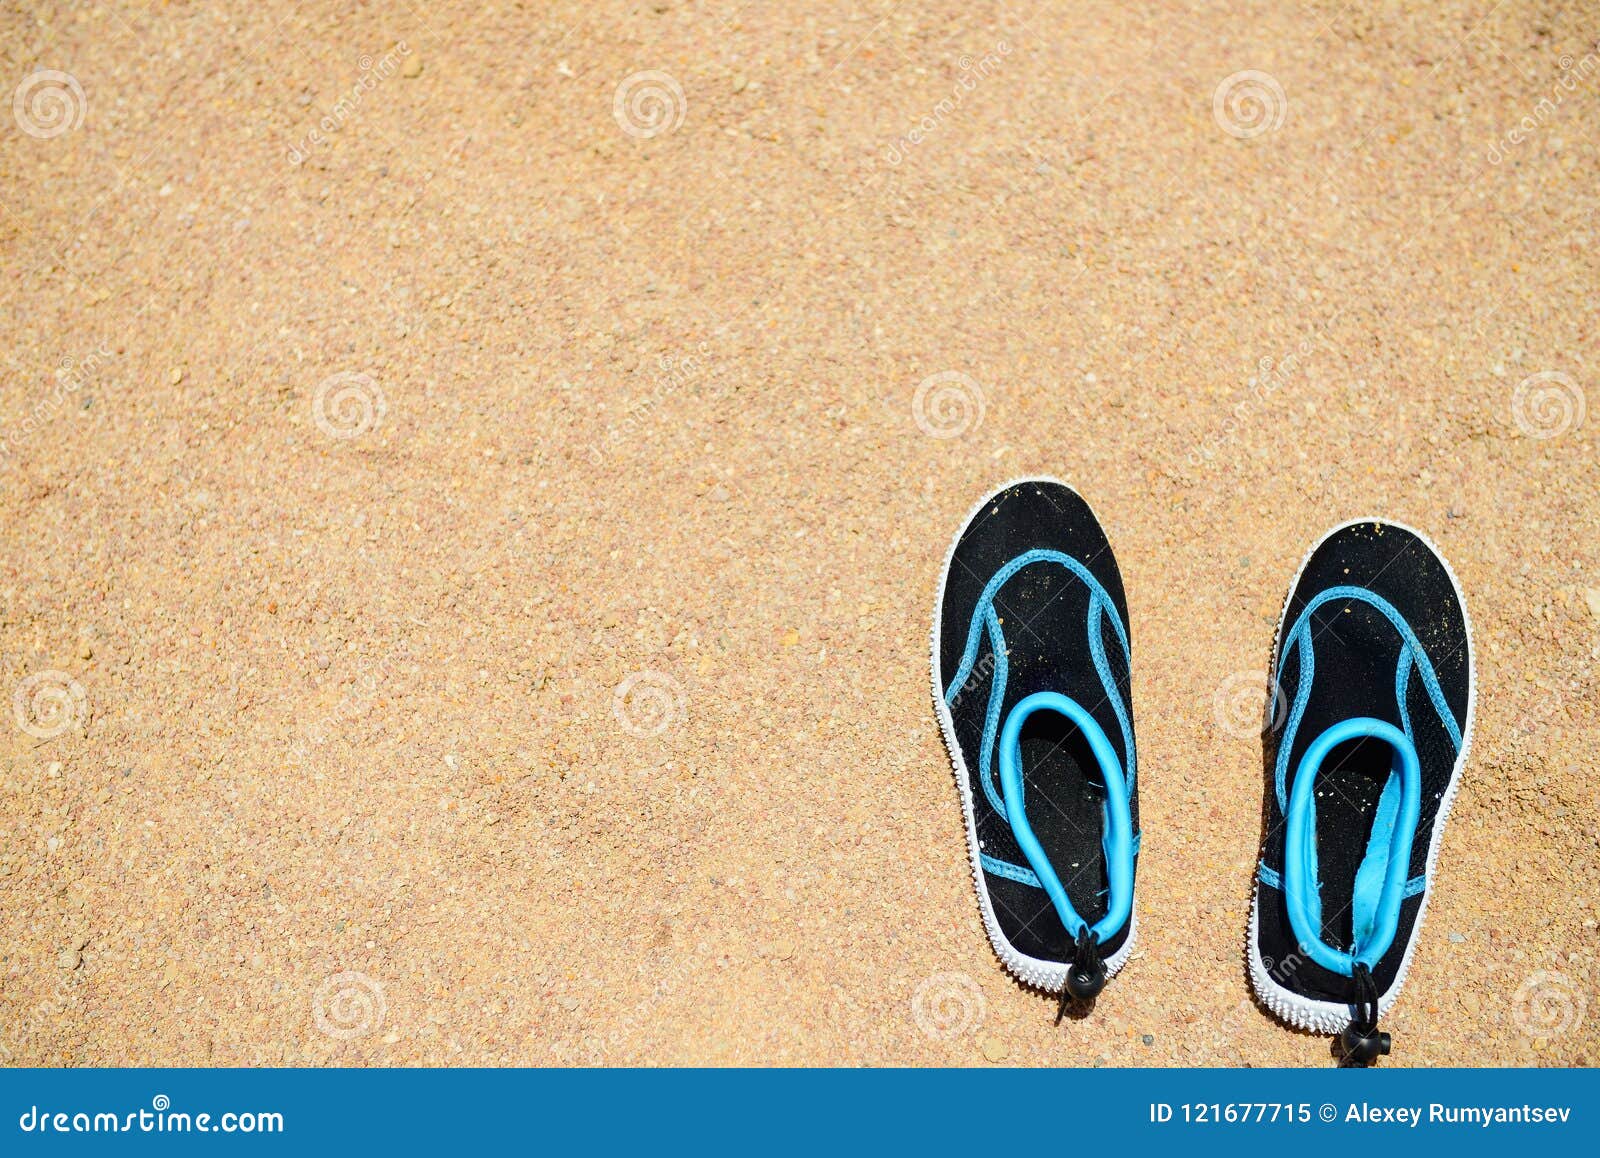 shoes for hot sand